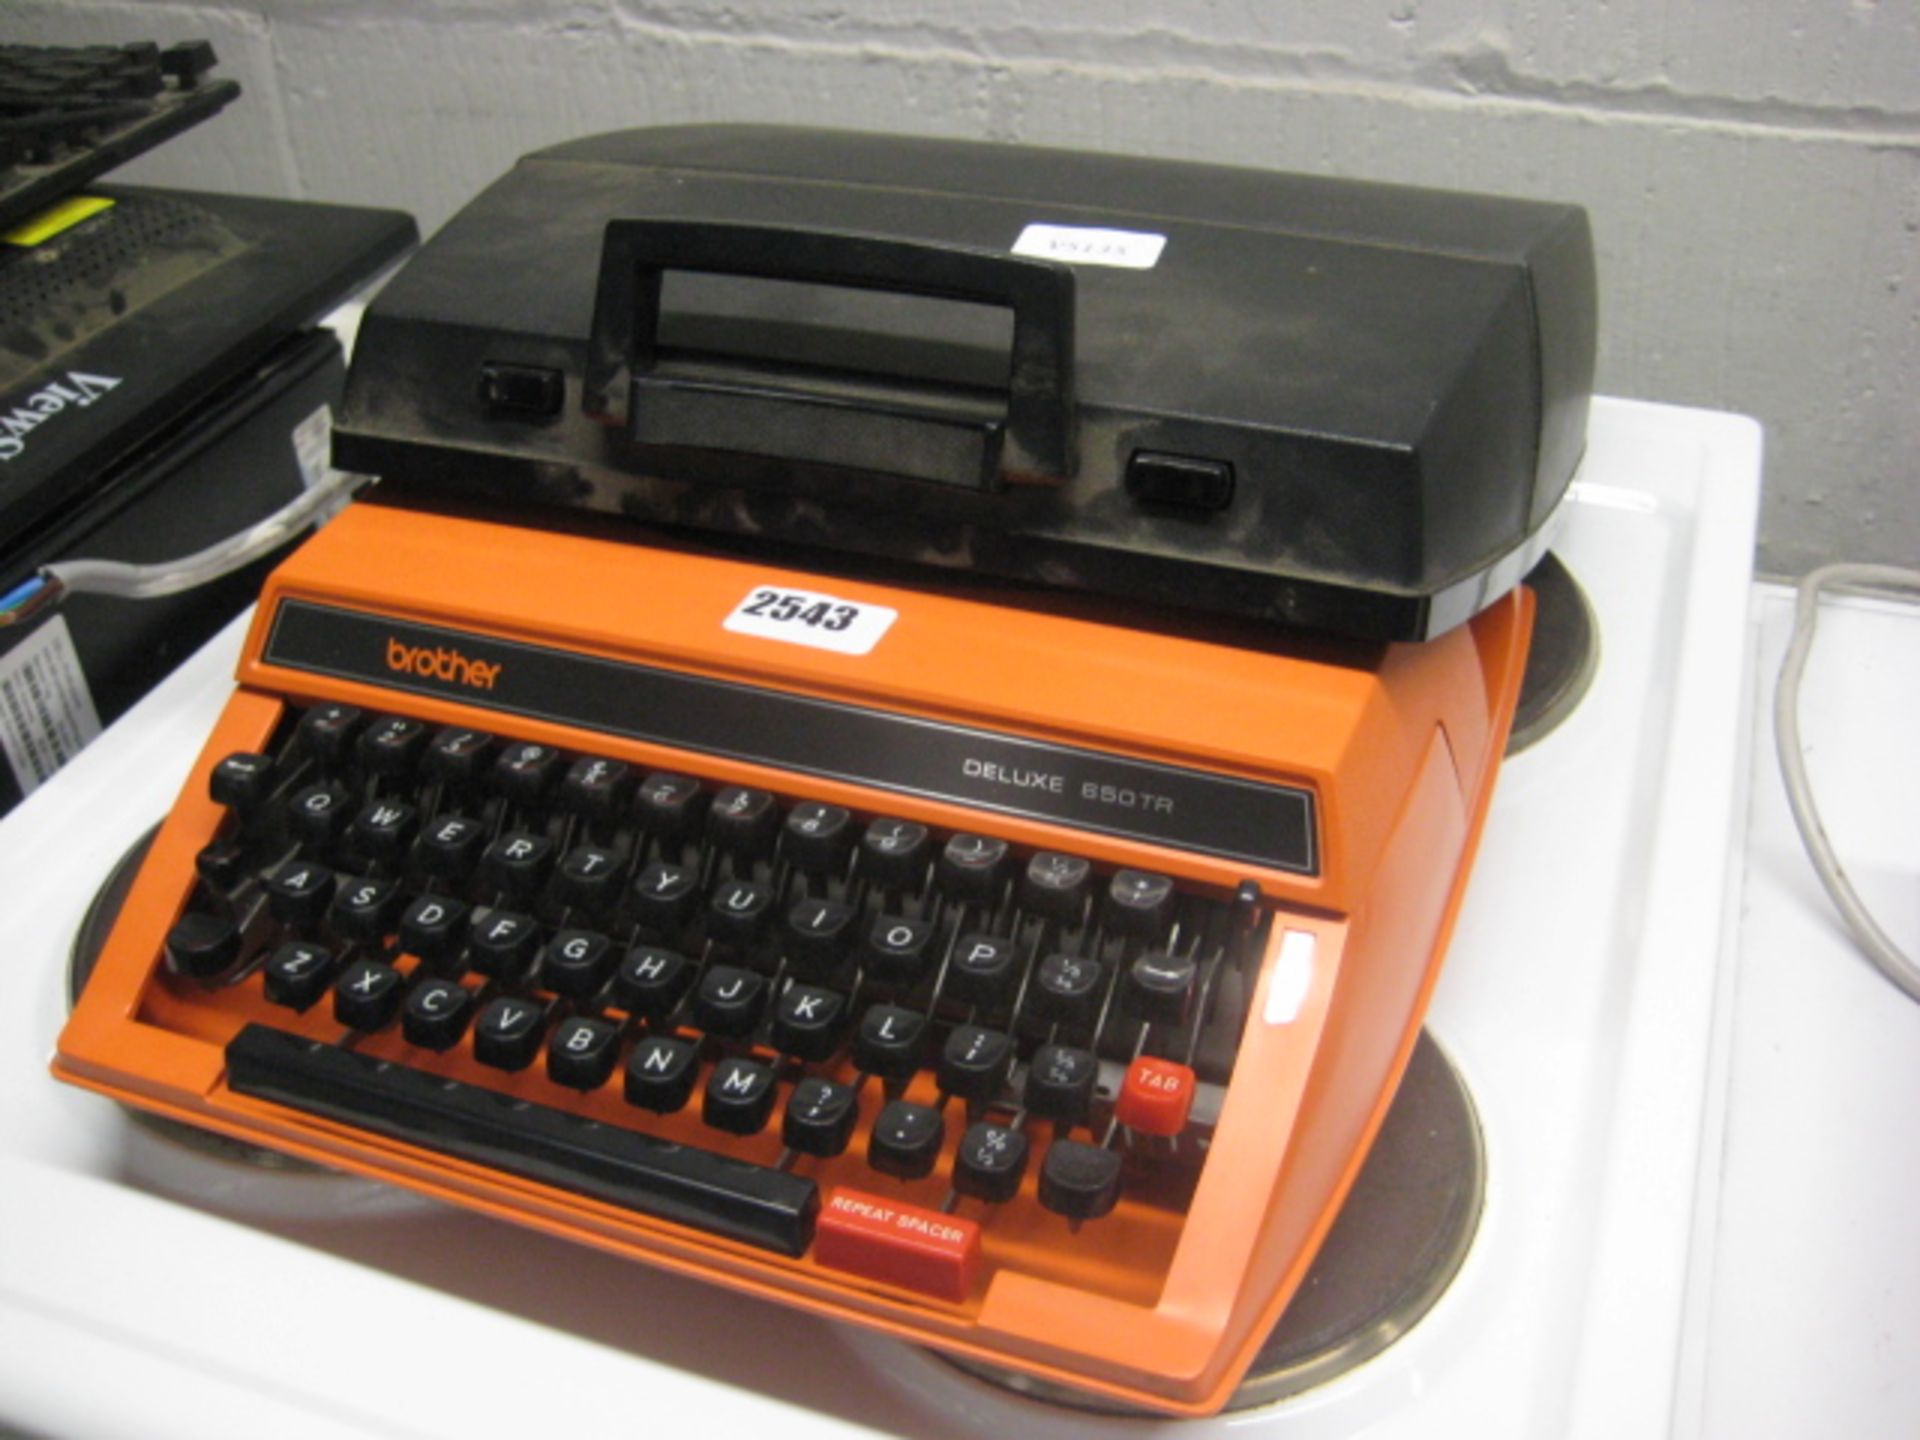 Brother Deluxe 650 TR typewriter